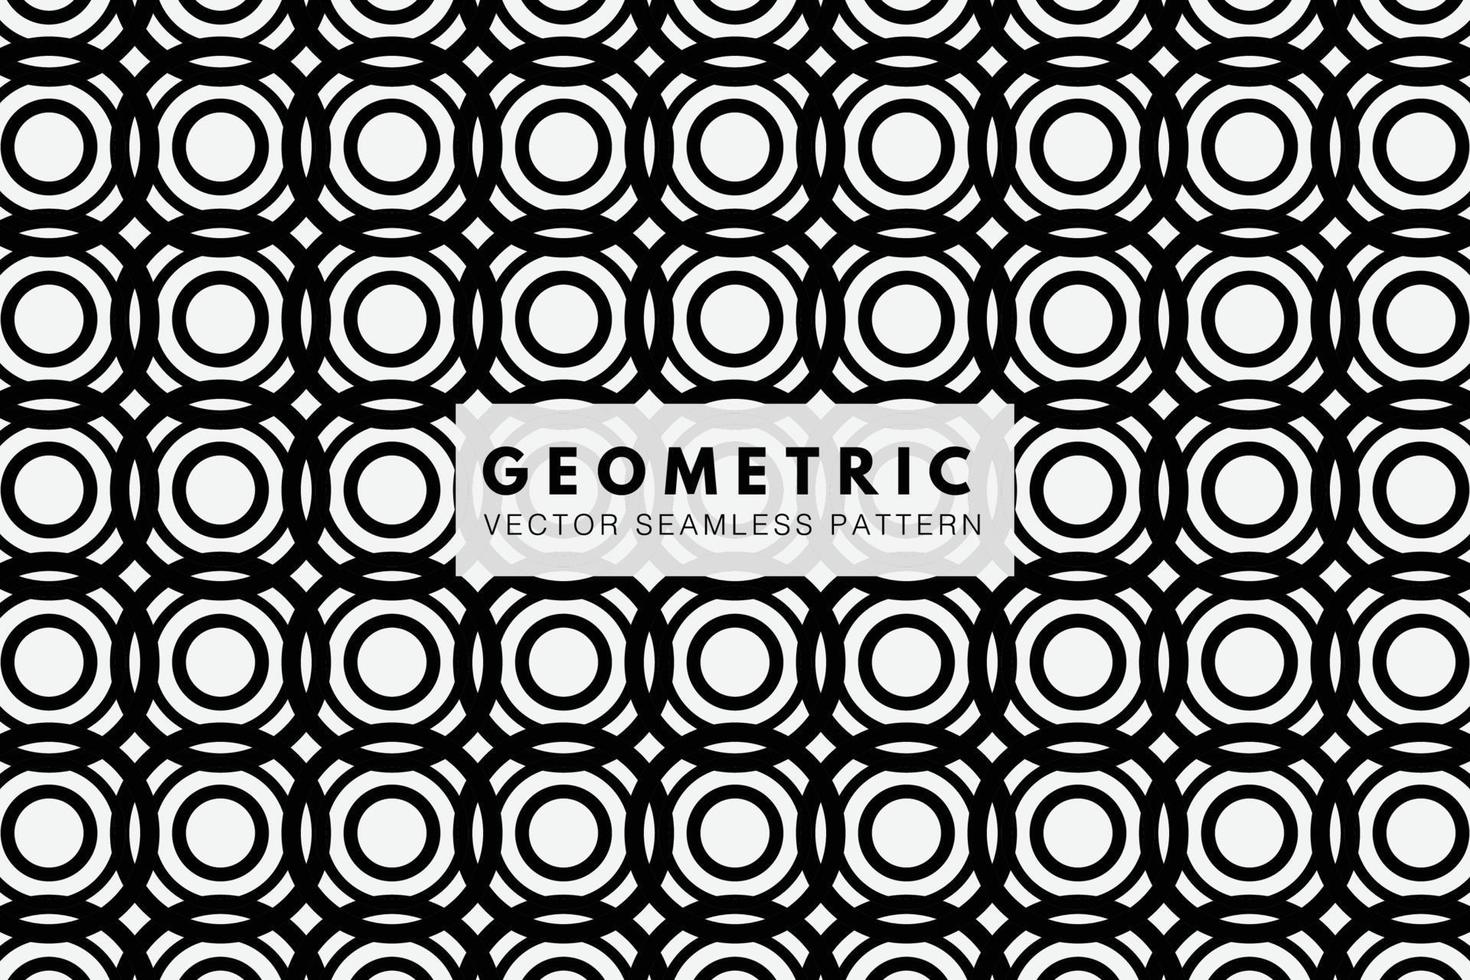 Overlapping black circles geometric round shapes. Seamless repeat vector pattern